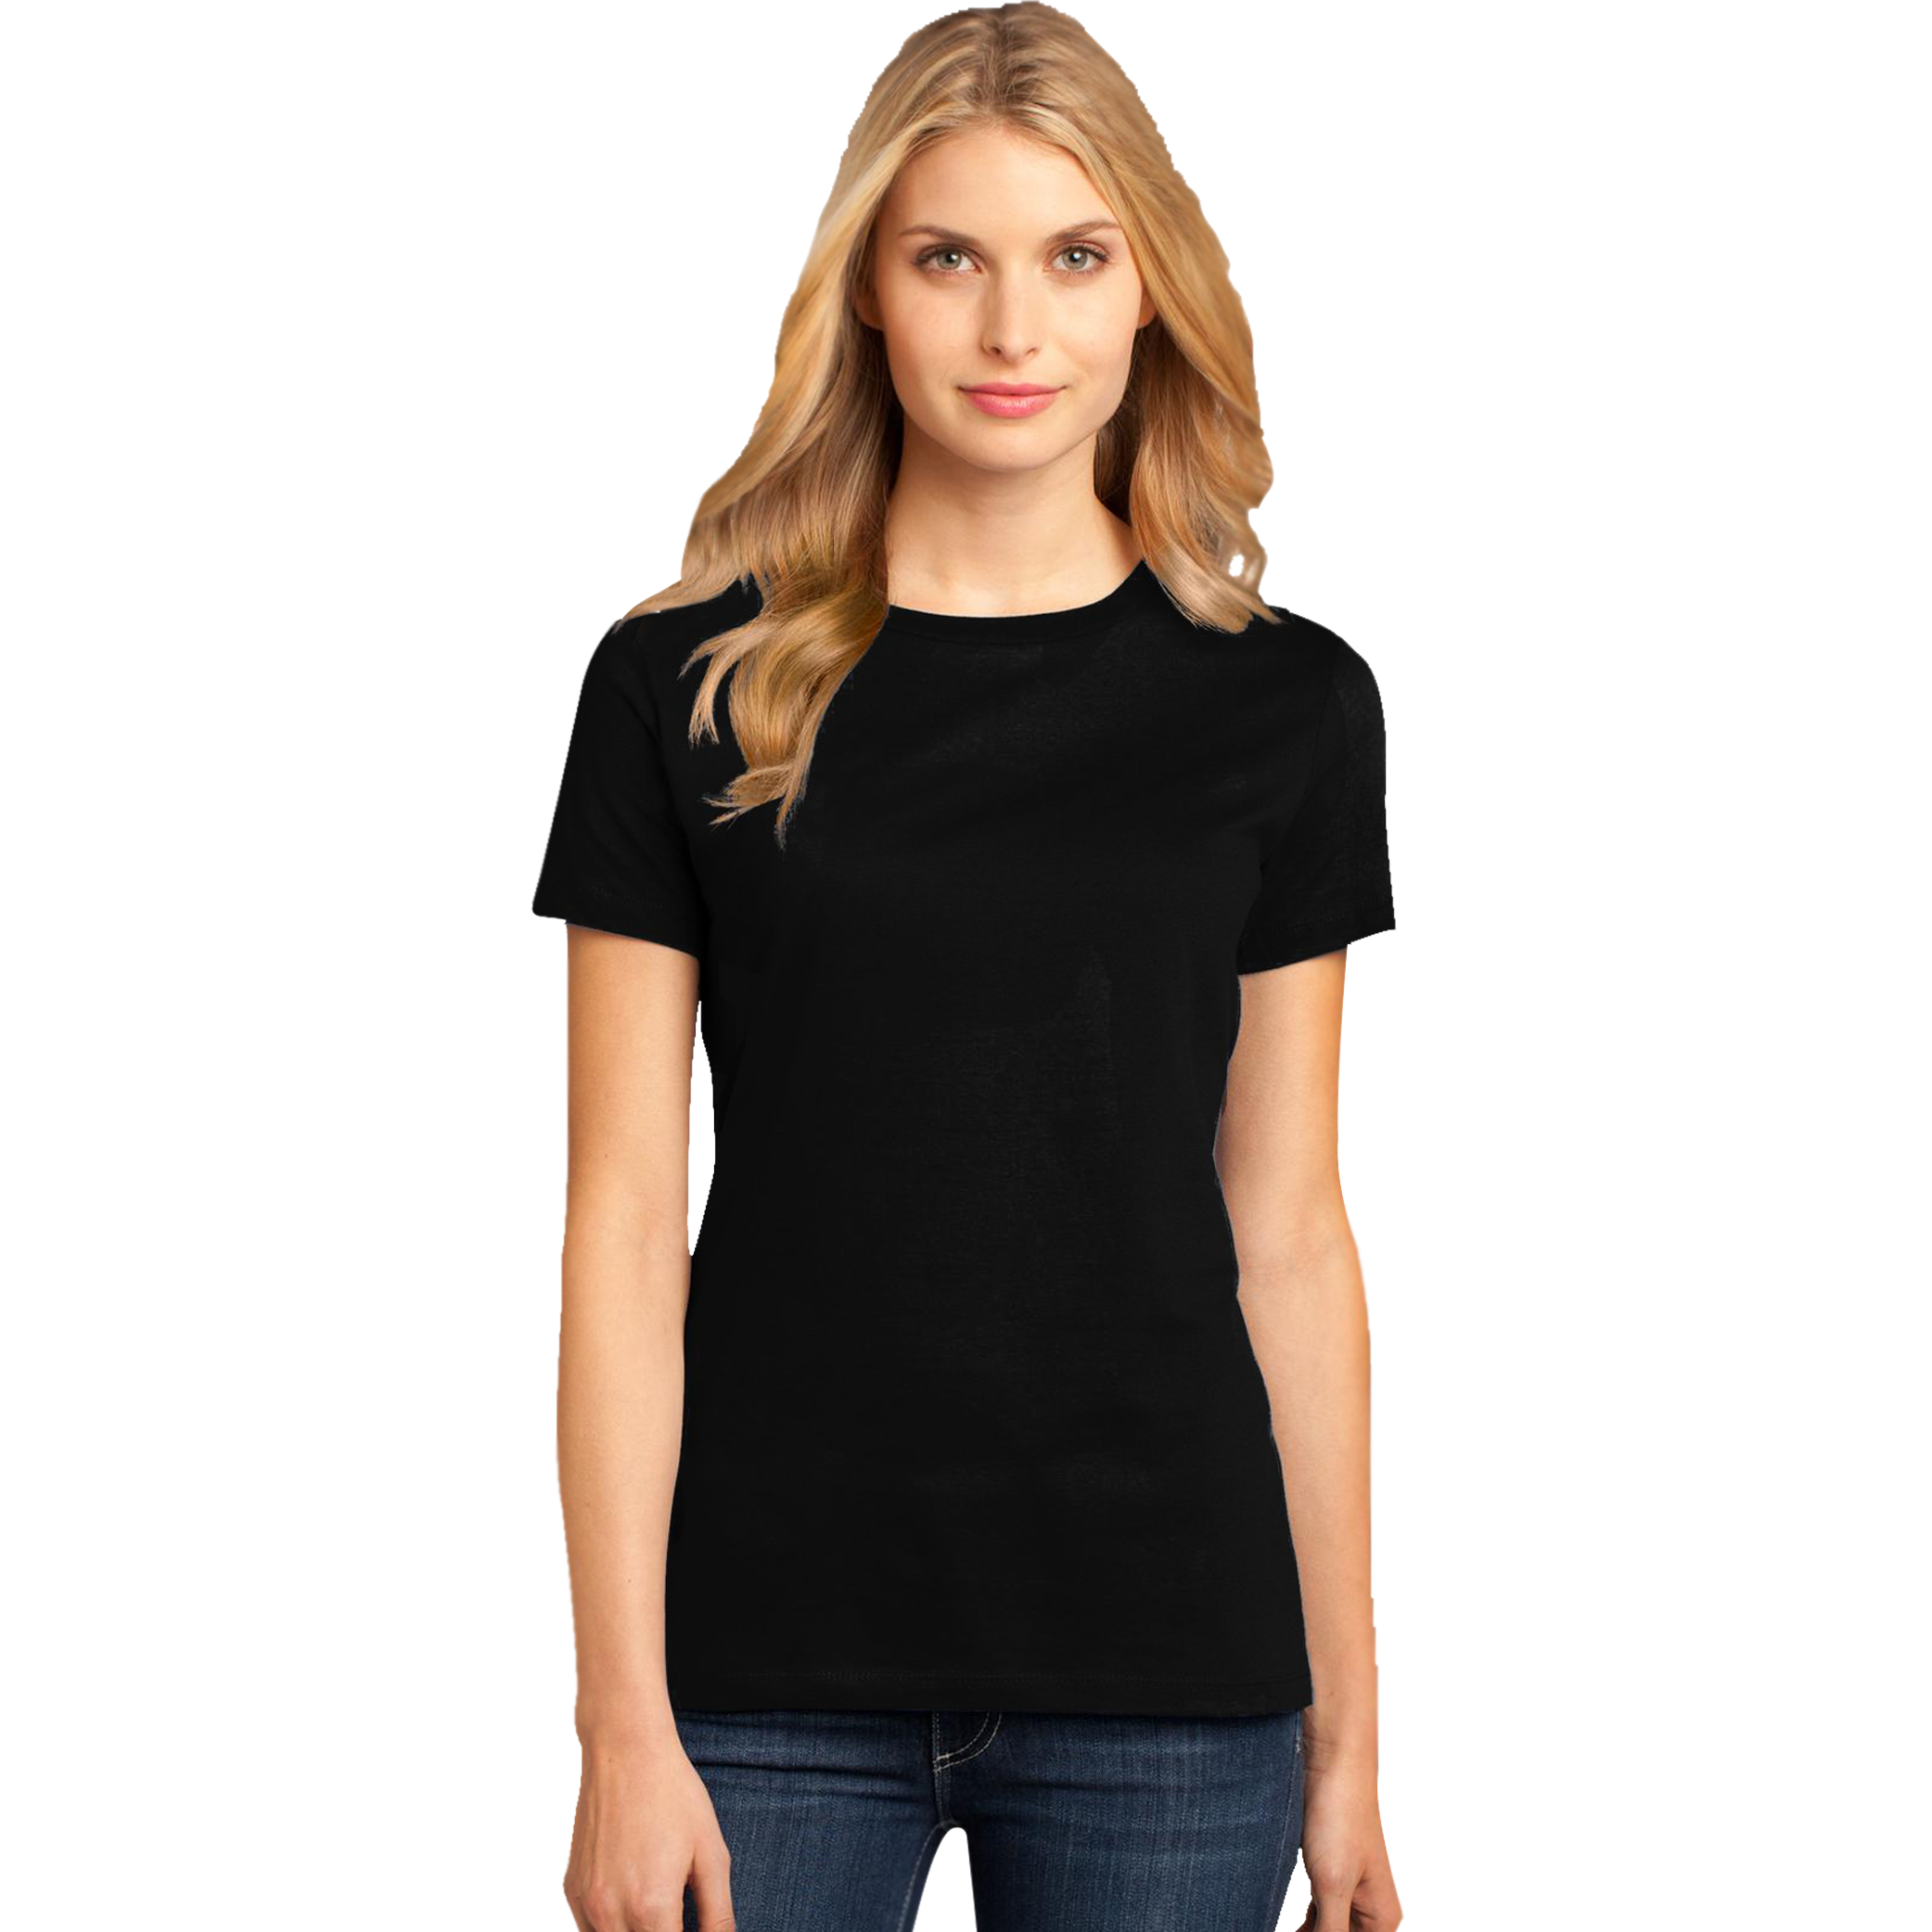 Download Women's R-Neck T-shirts | T-shirt Loot - Customized T ...